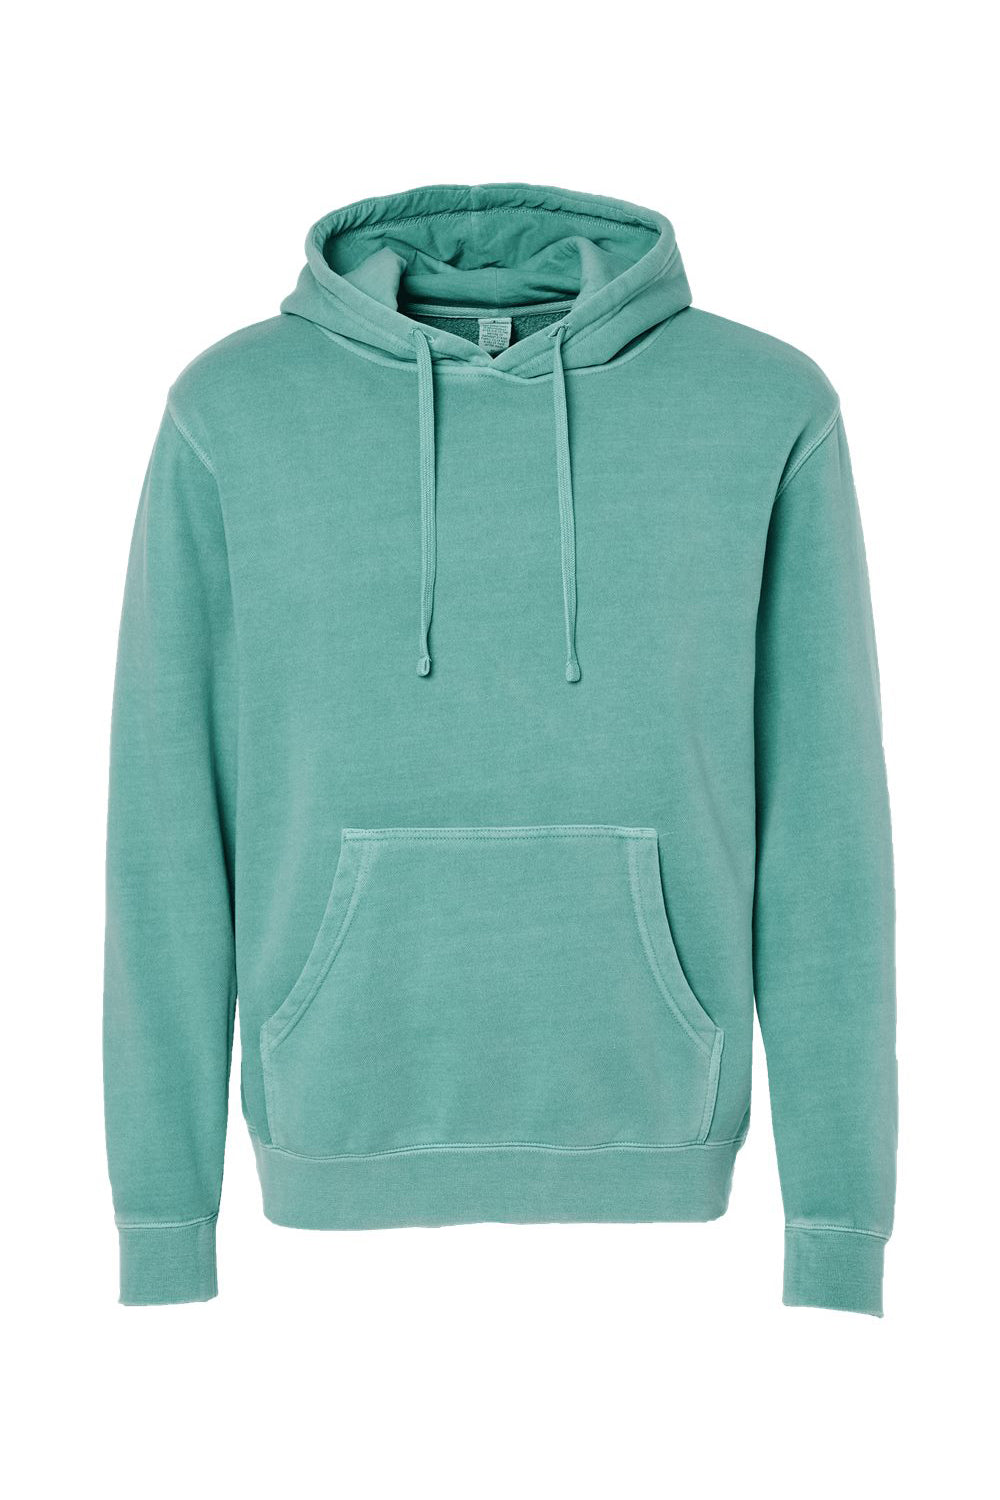 Independent Trading Co. PRM4500 Mens Pigment Dyed Hooded Sweatshirt Hoodie Mint Green Flat Front